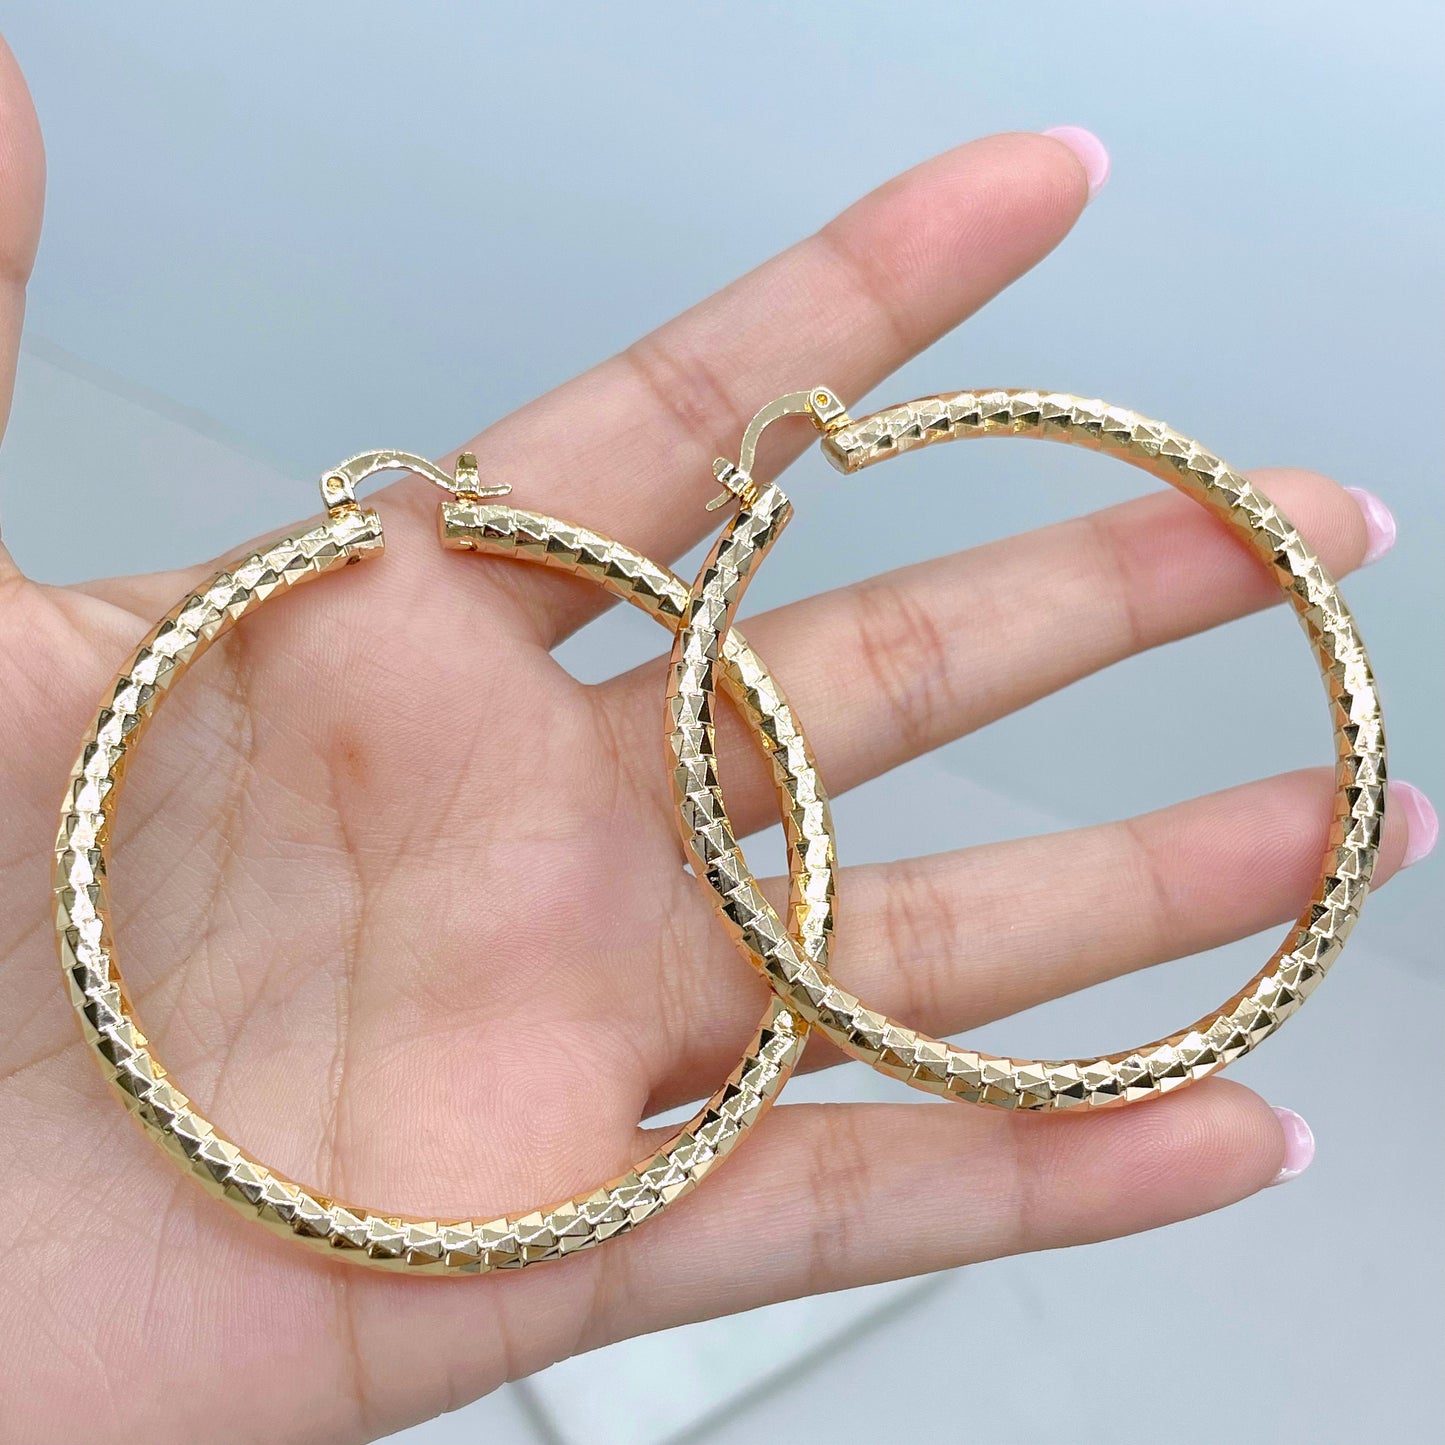 18k Gold Filled 58mm Textured Hoops Earrings, 4mm Thickness Wholesale Jewelry Making Supplies